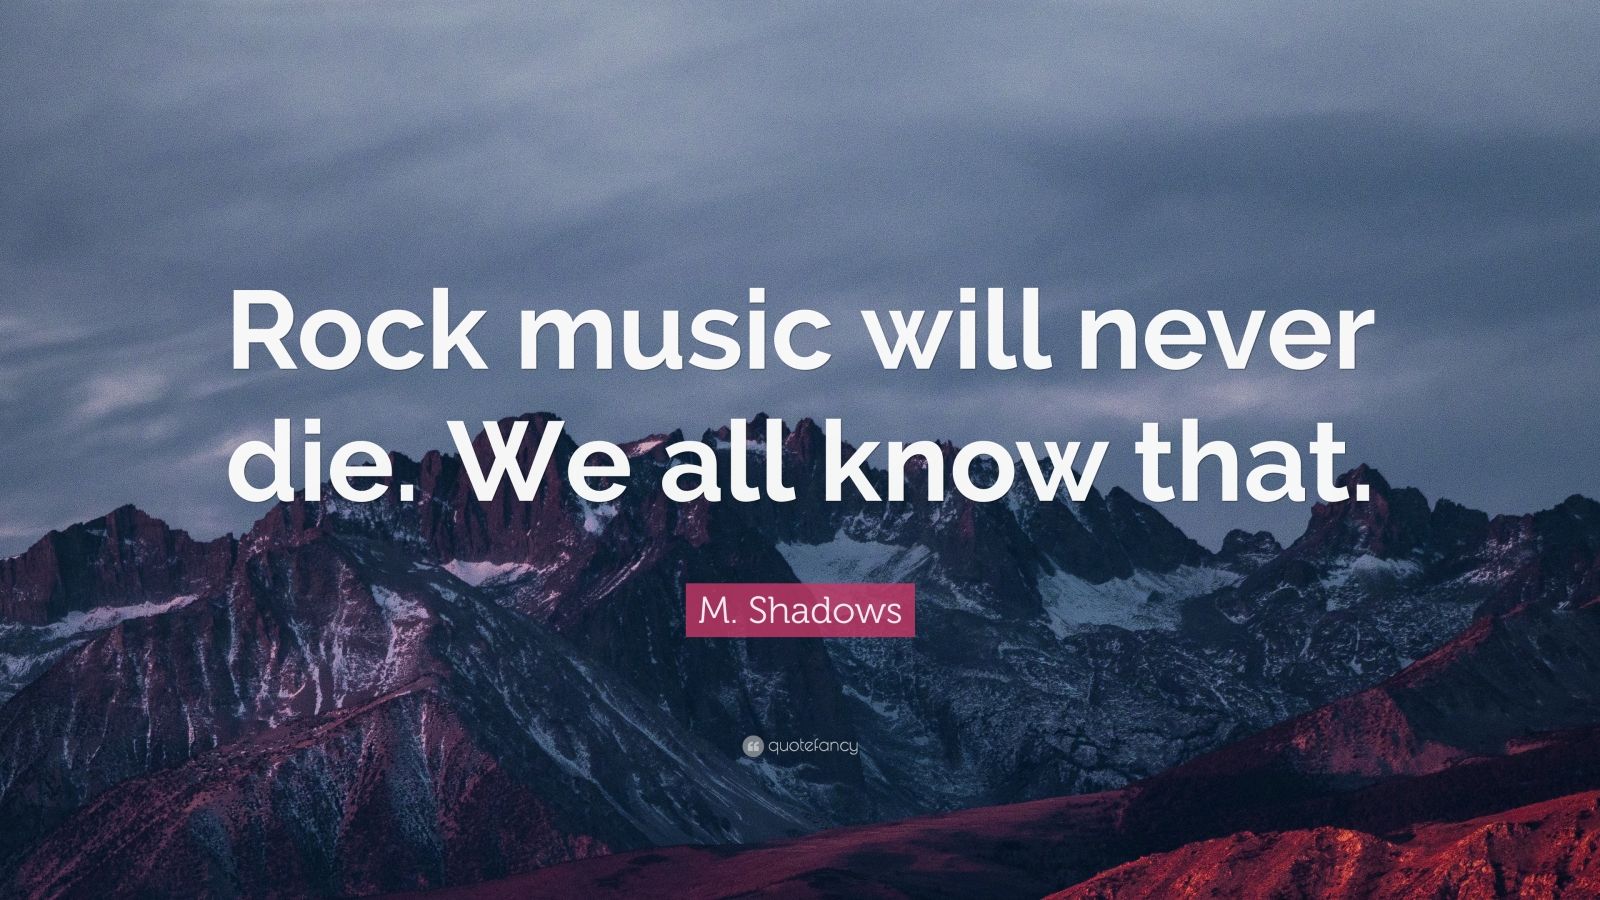 M. Shadows Quote: "Rock music will never die. We all know that." (7 wallpapers) - Quotefancy